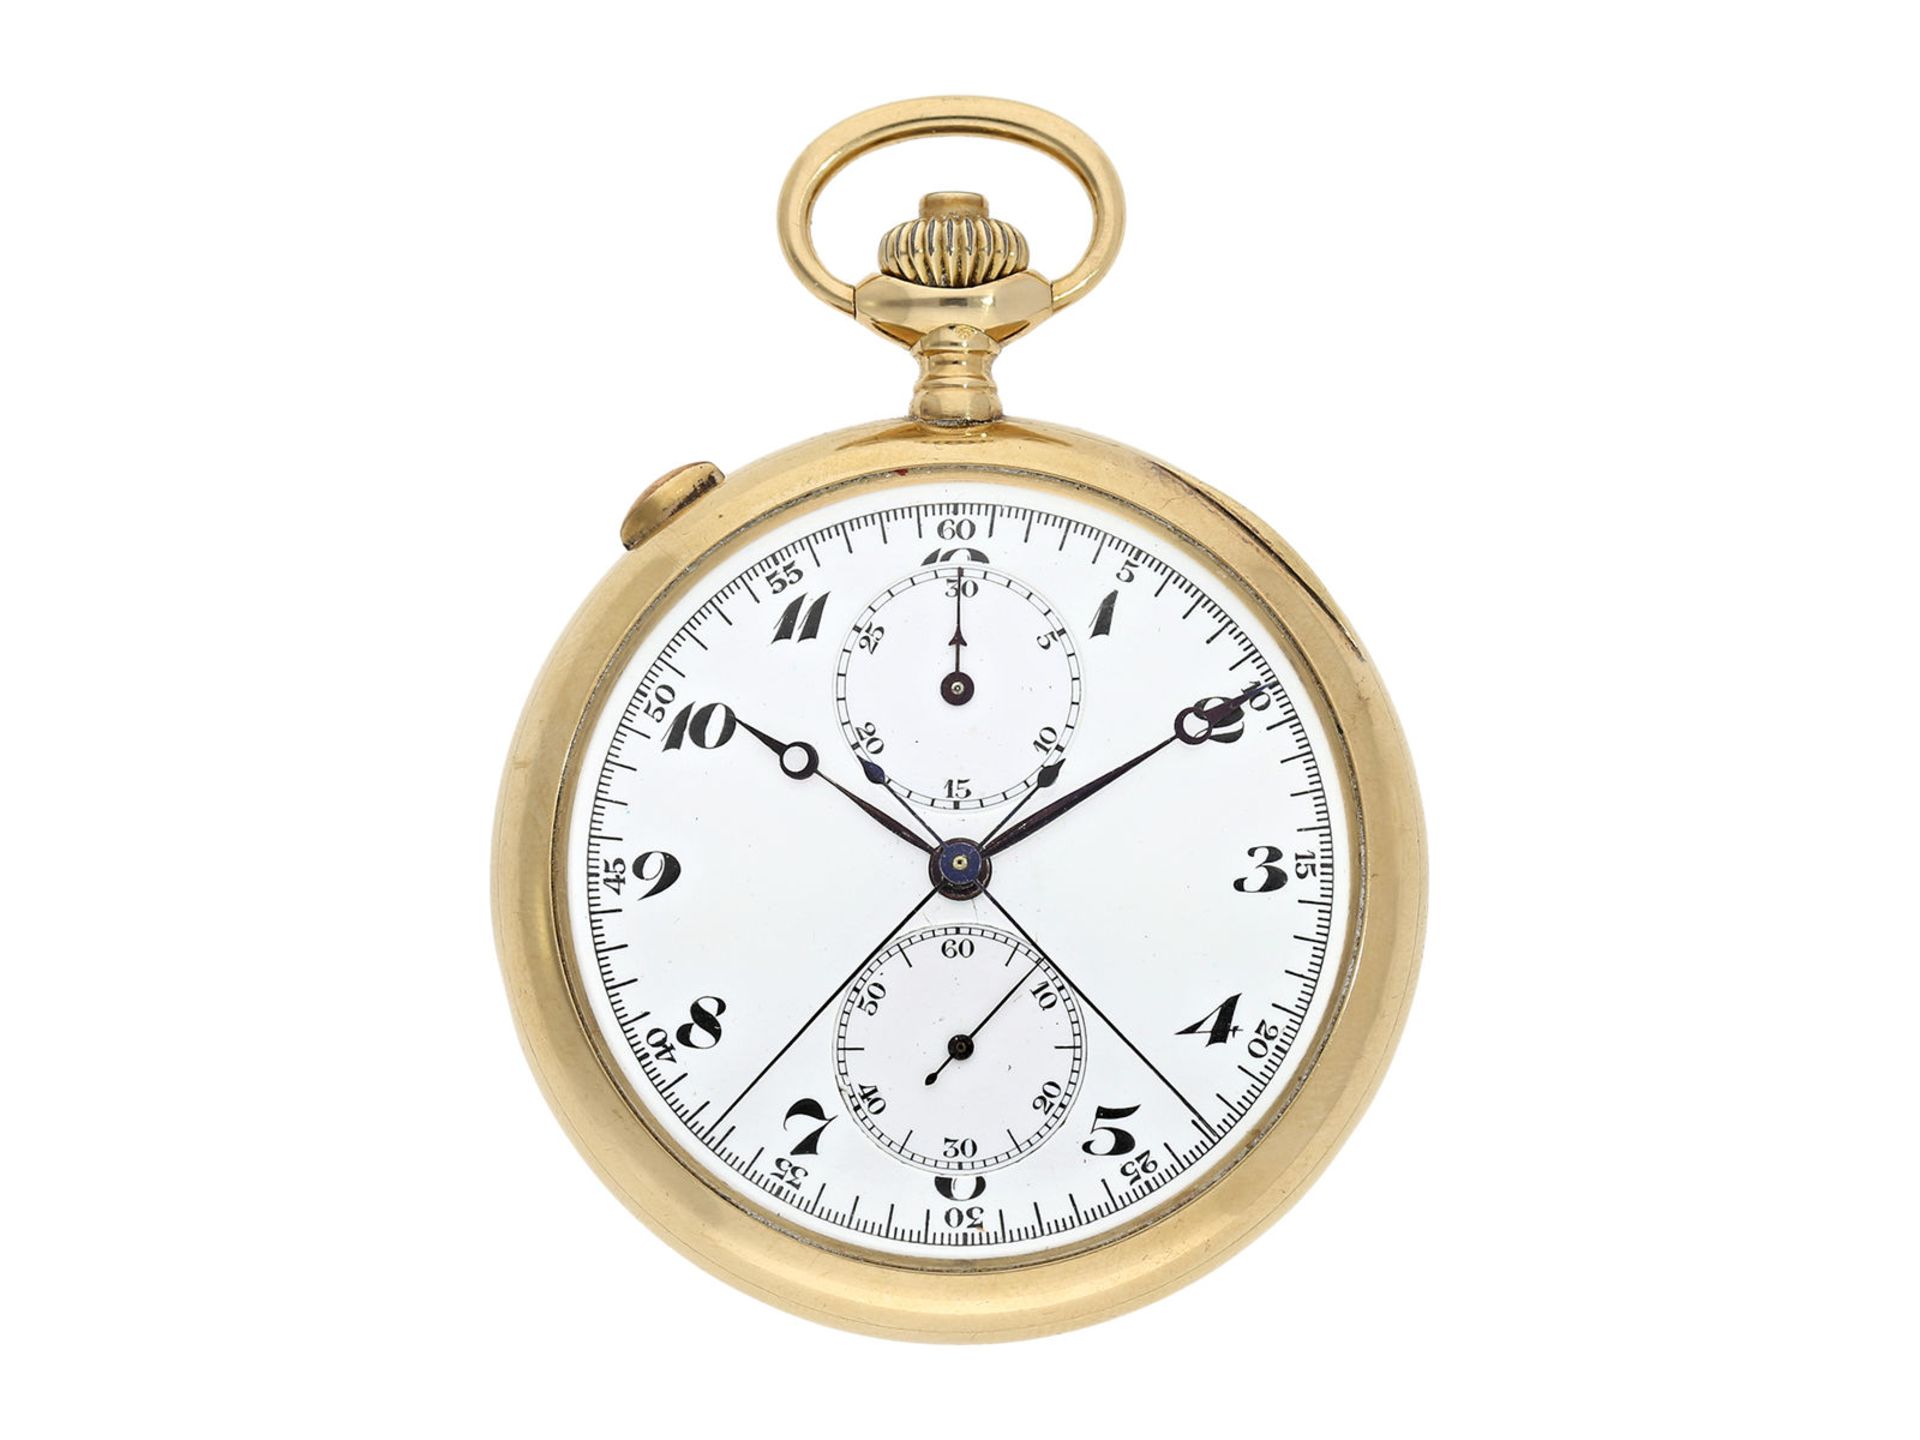 Pocket watch: extremely fine Vacheron & Constantin split-seconds chronograph with register, No. 1154